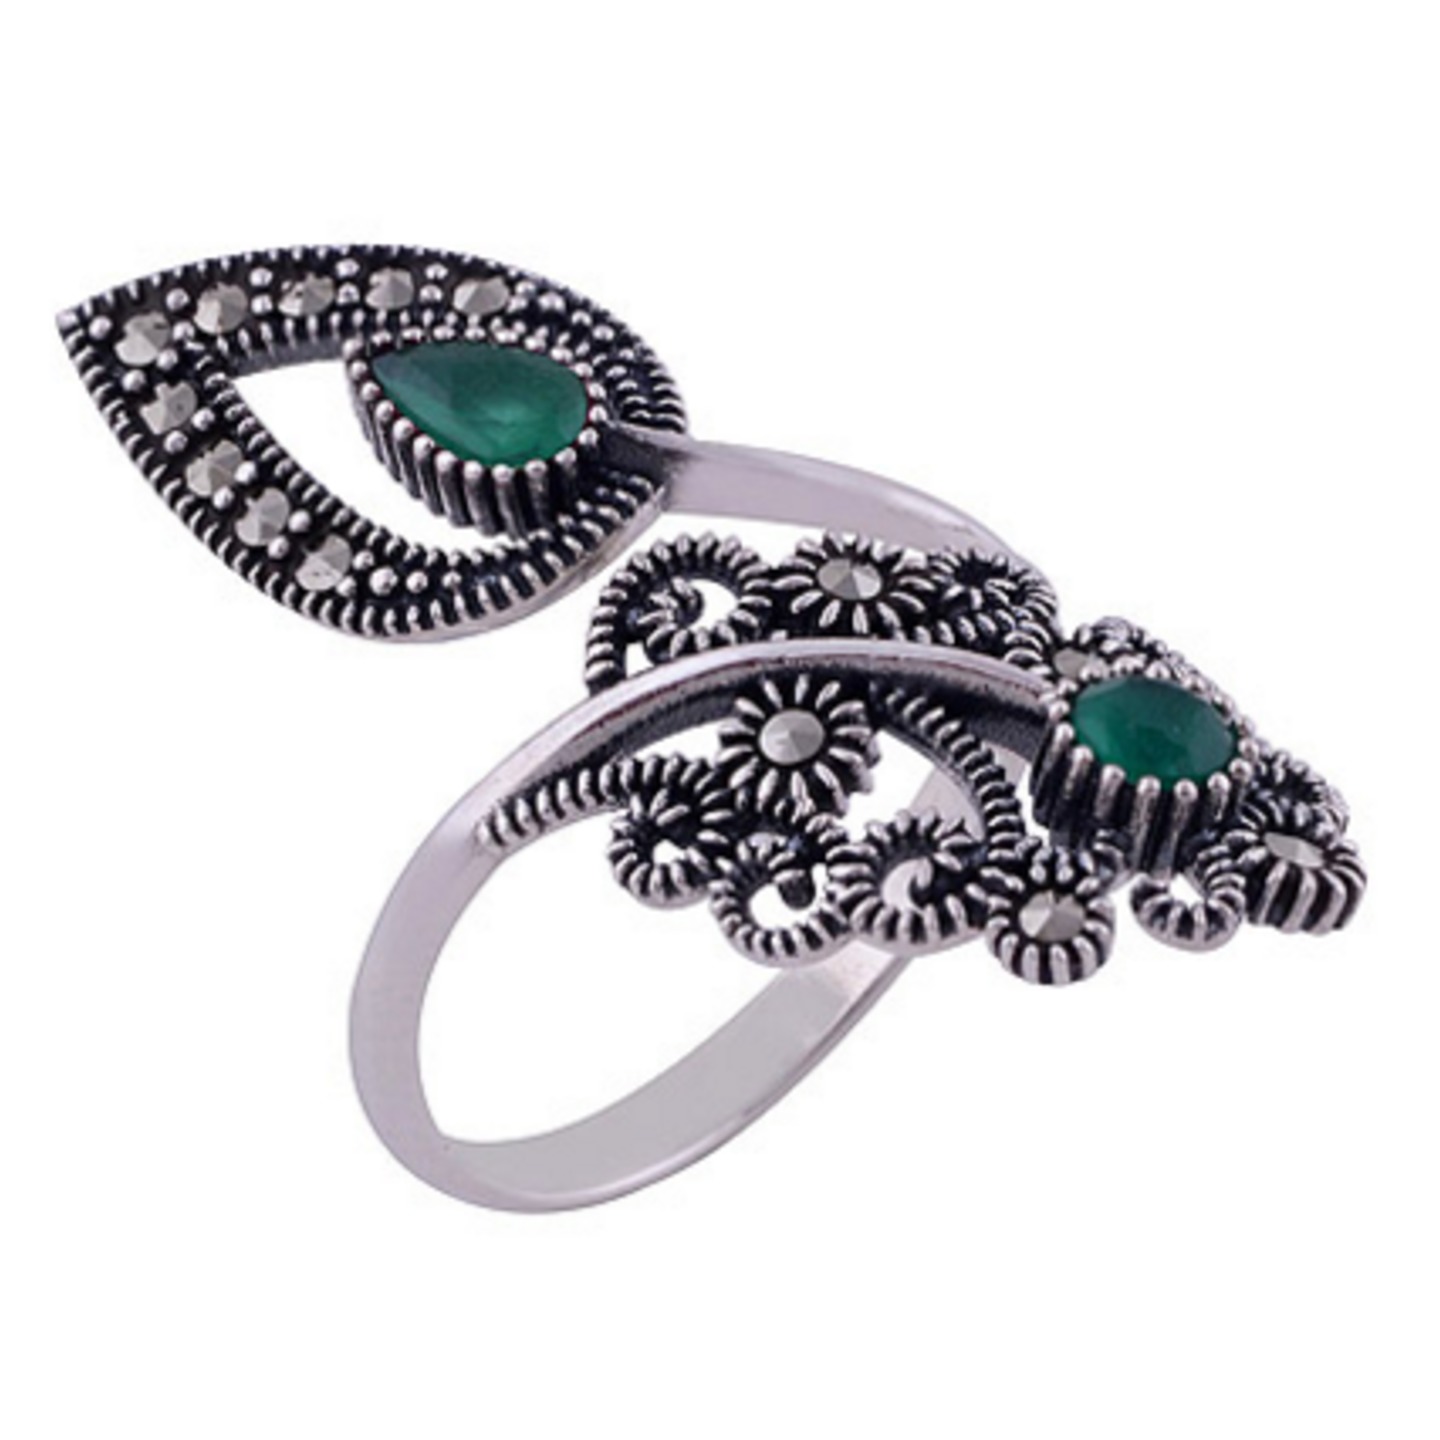 The Green Pasley Silver Ring